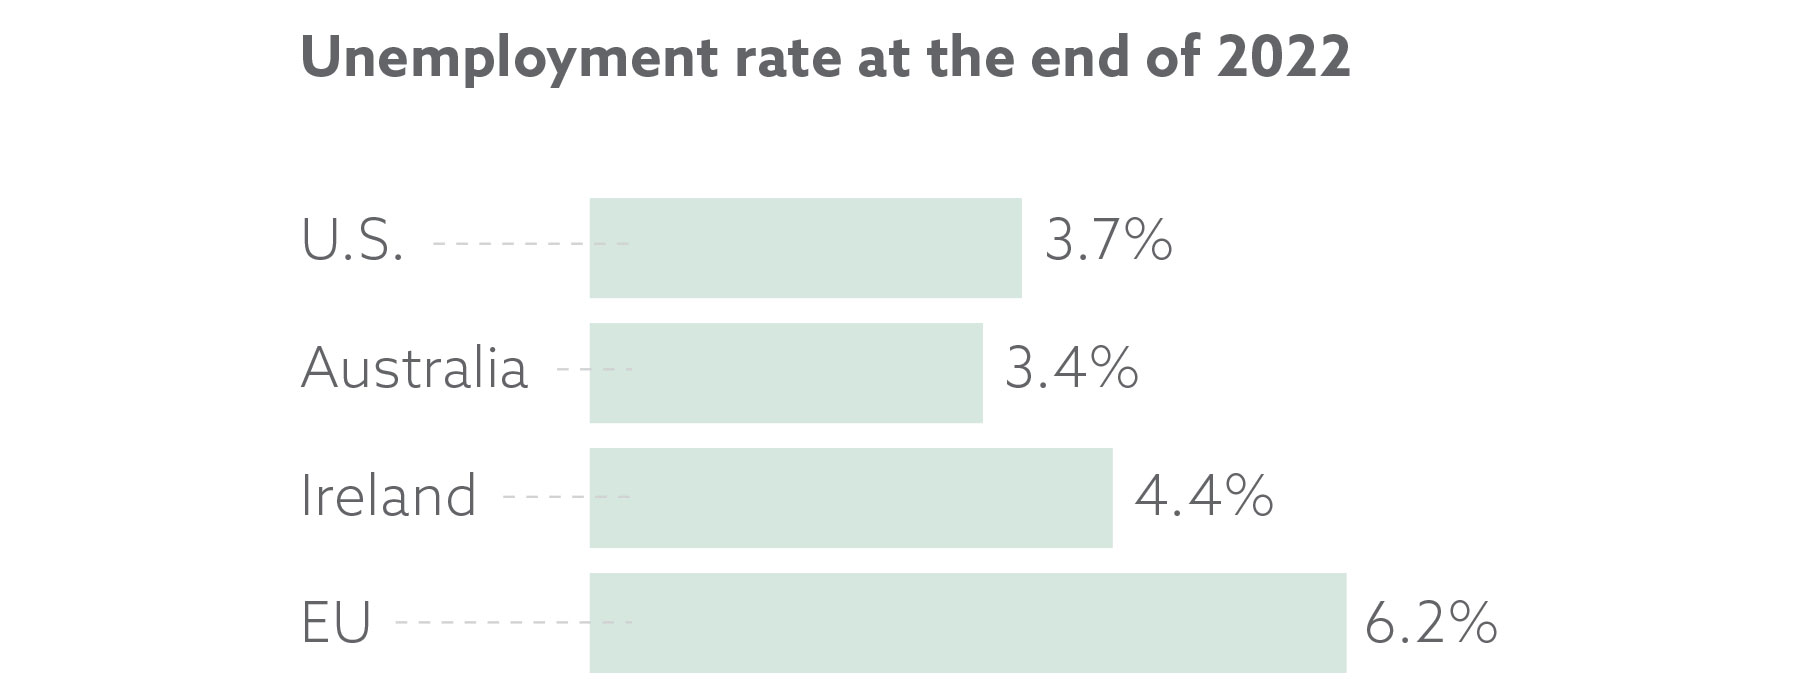 Unemployment rate at the end of 2022